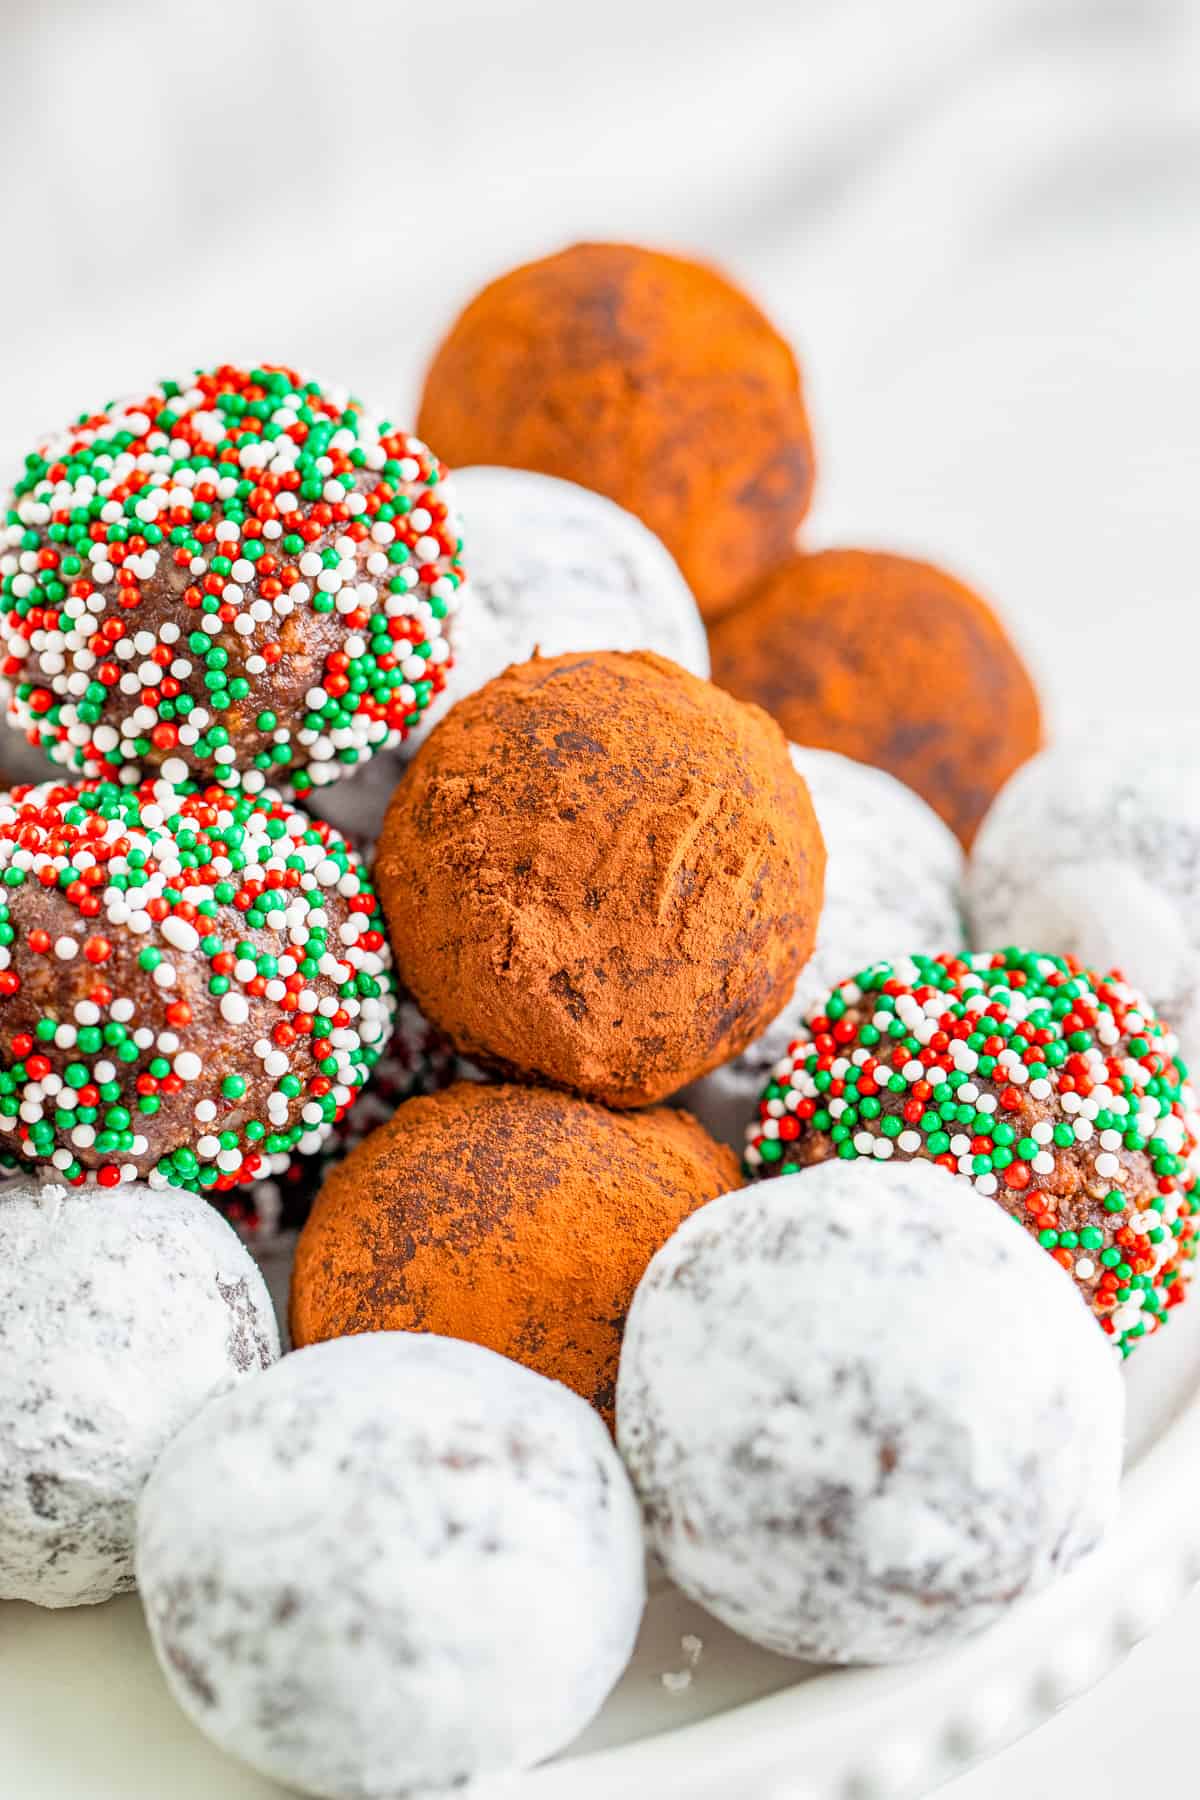 Finished Rum Balls rolled in powdered sugar, sprinkles and cocoa powder on white cake stand.